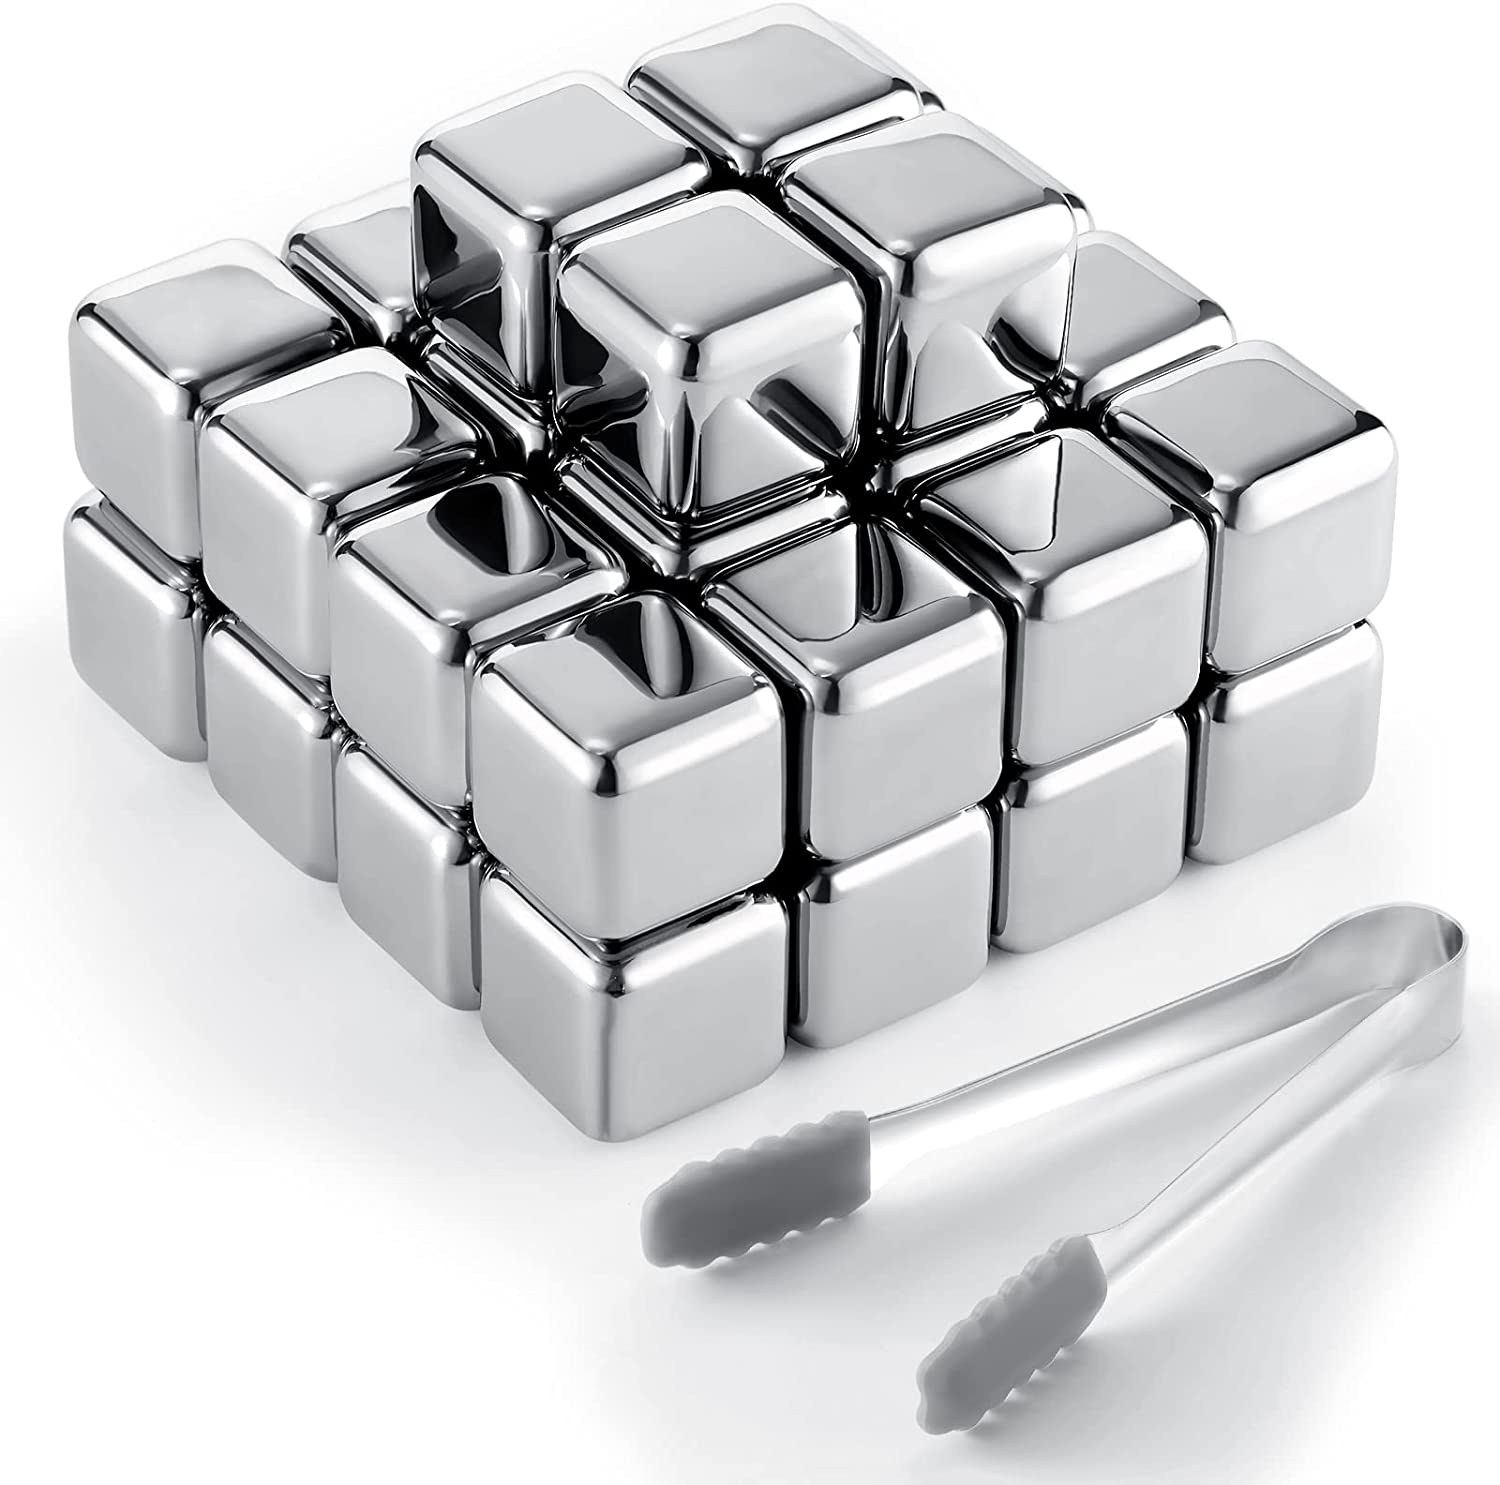 Stainless steel Ice Cube